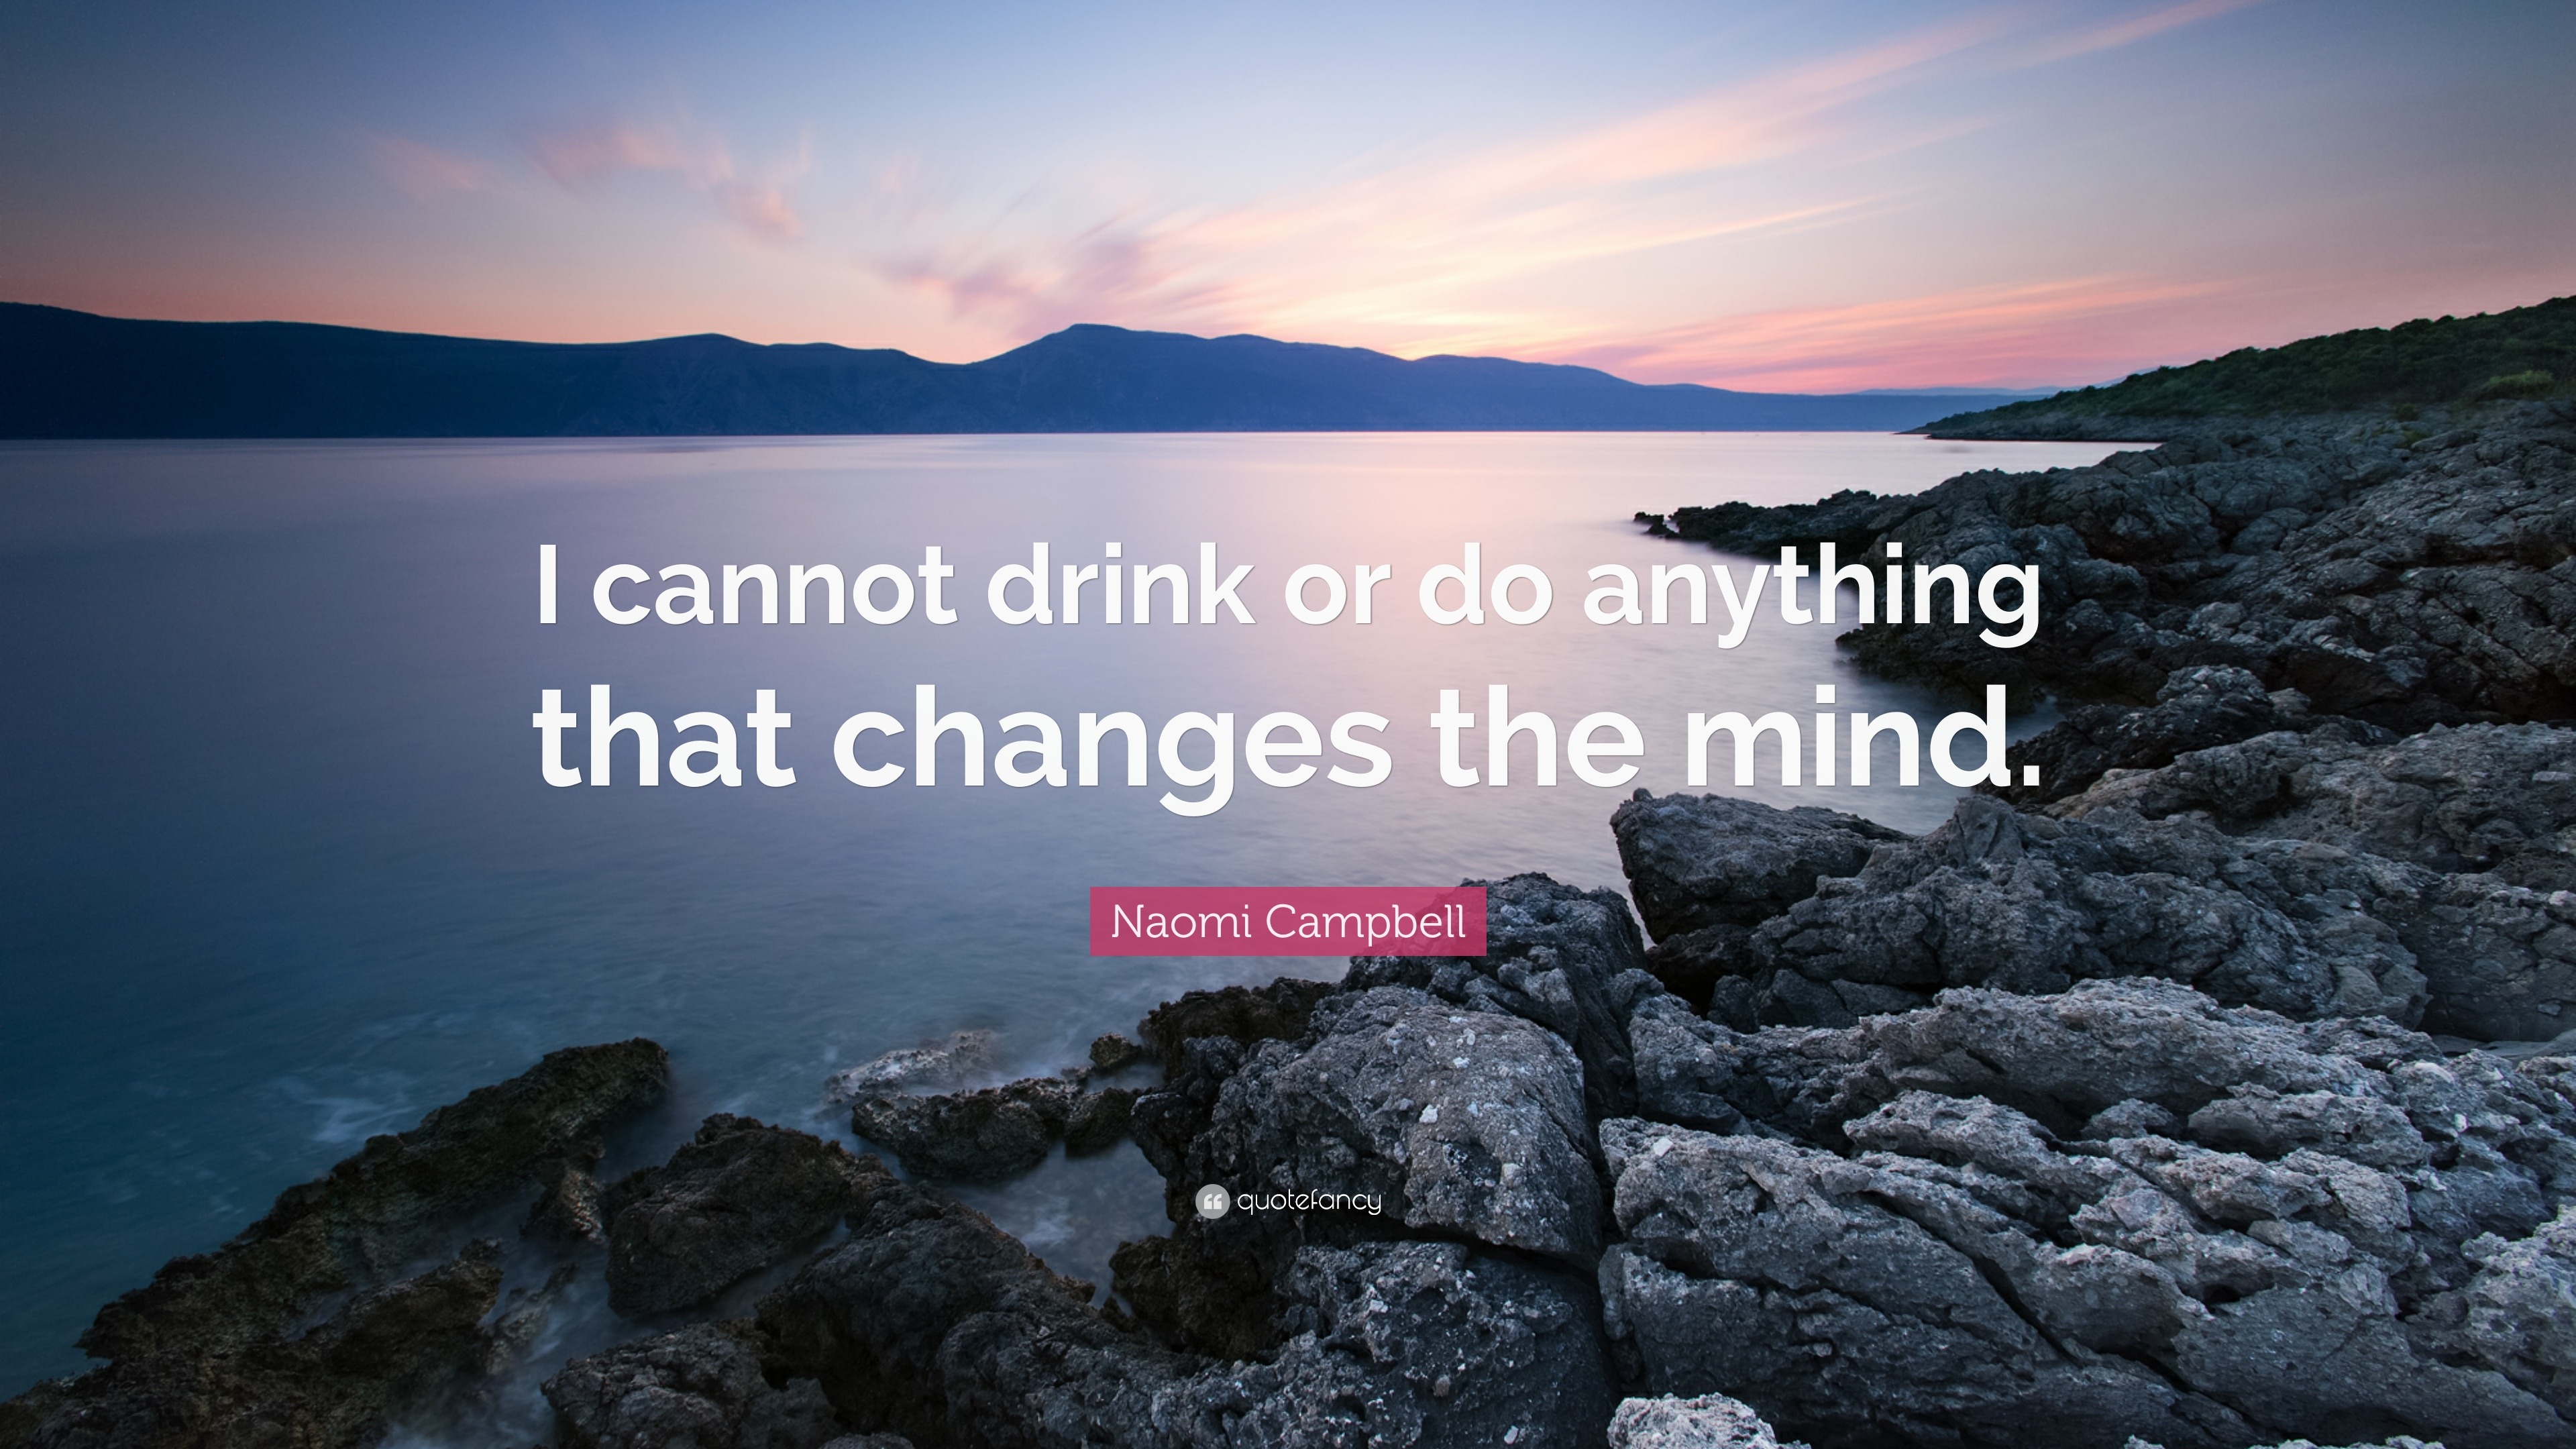 Naomi Campbell Quote: “I cannot drink or do anything that changes the mind.”